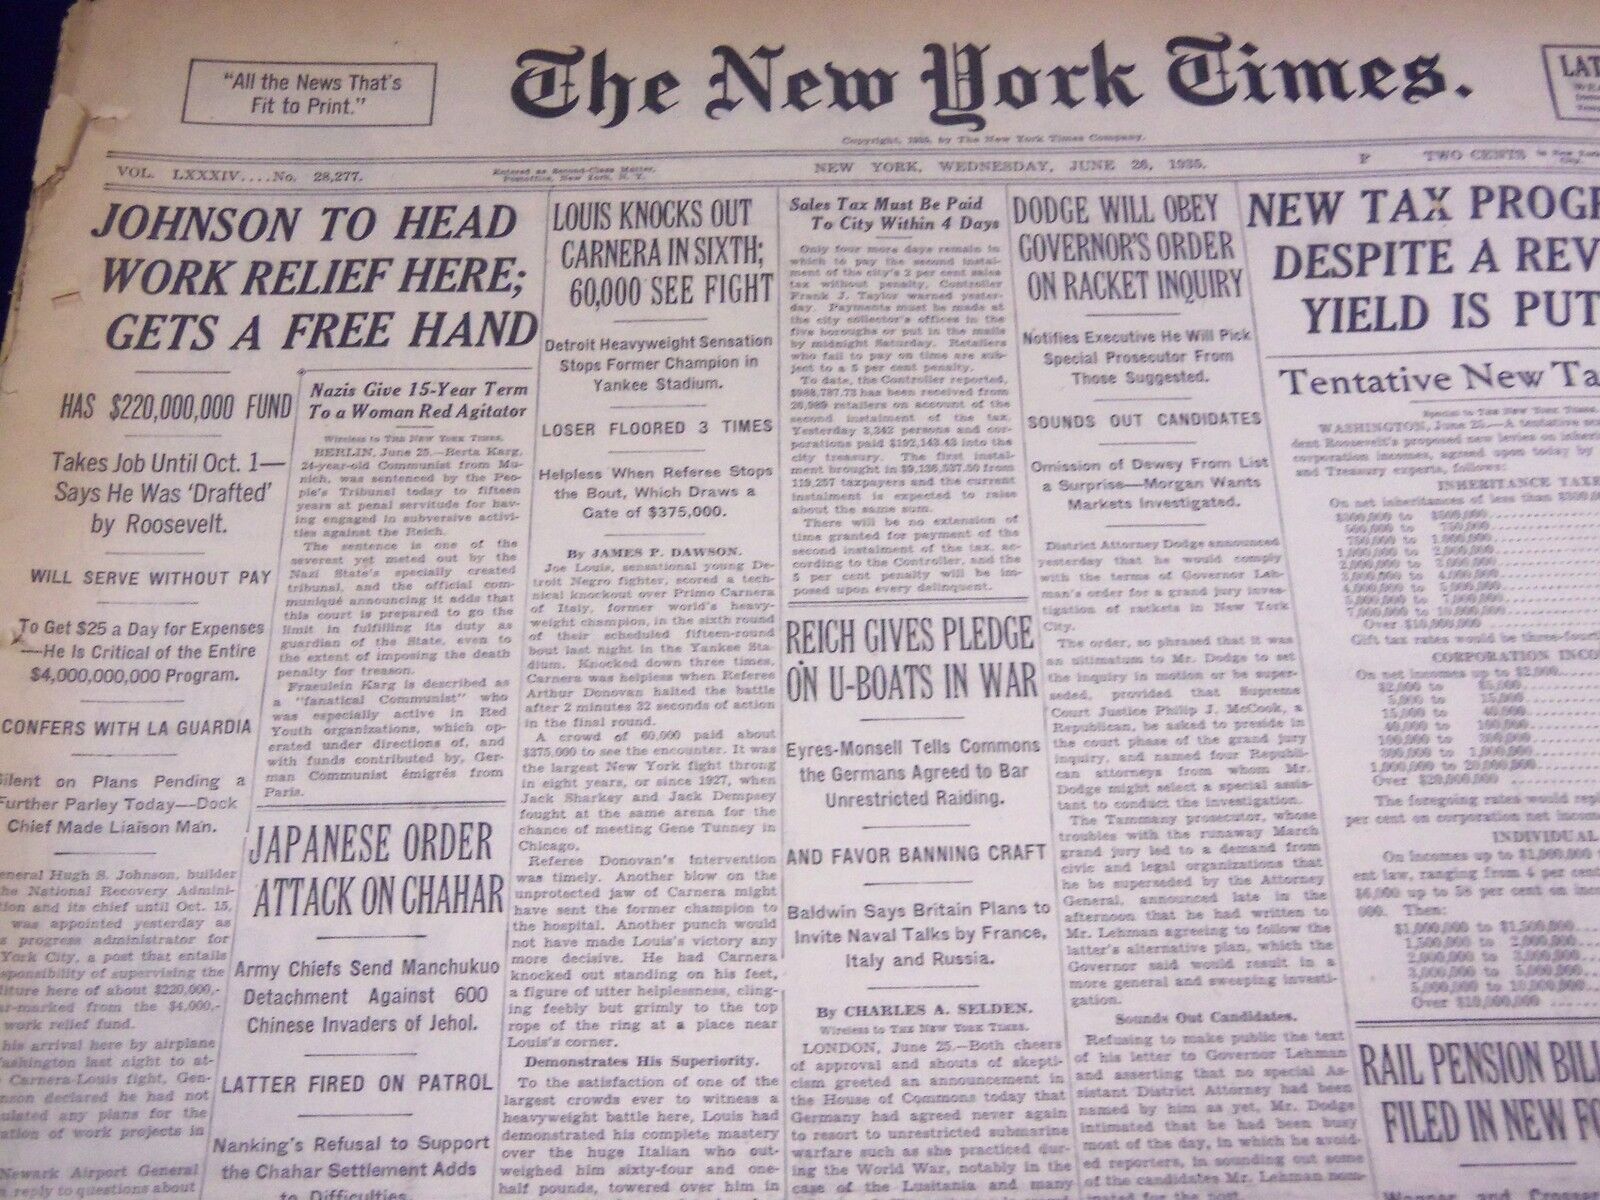 1935 JUNE 26 NEW YORK TIMES - LOUIS KNOCKS OUT CARNERA IN SIXTH - NT 1937